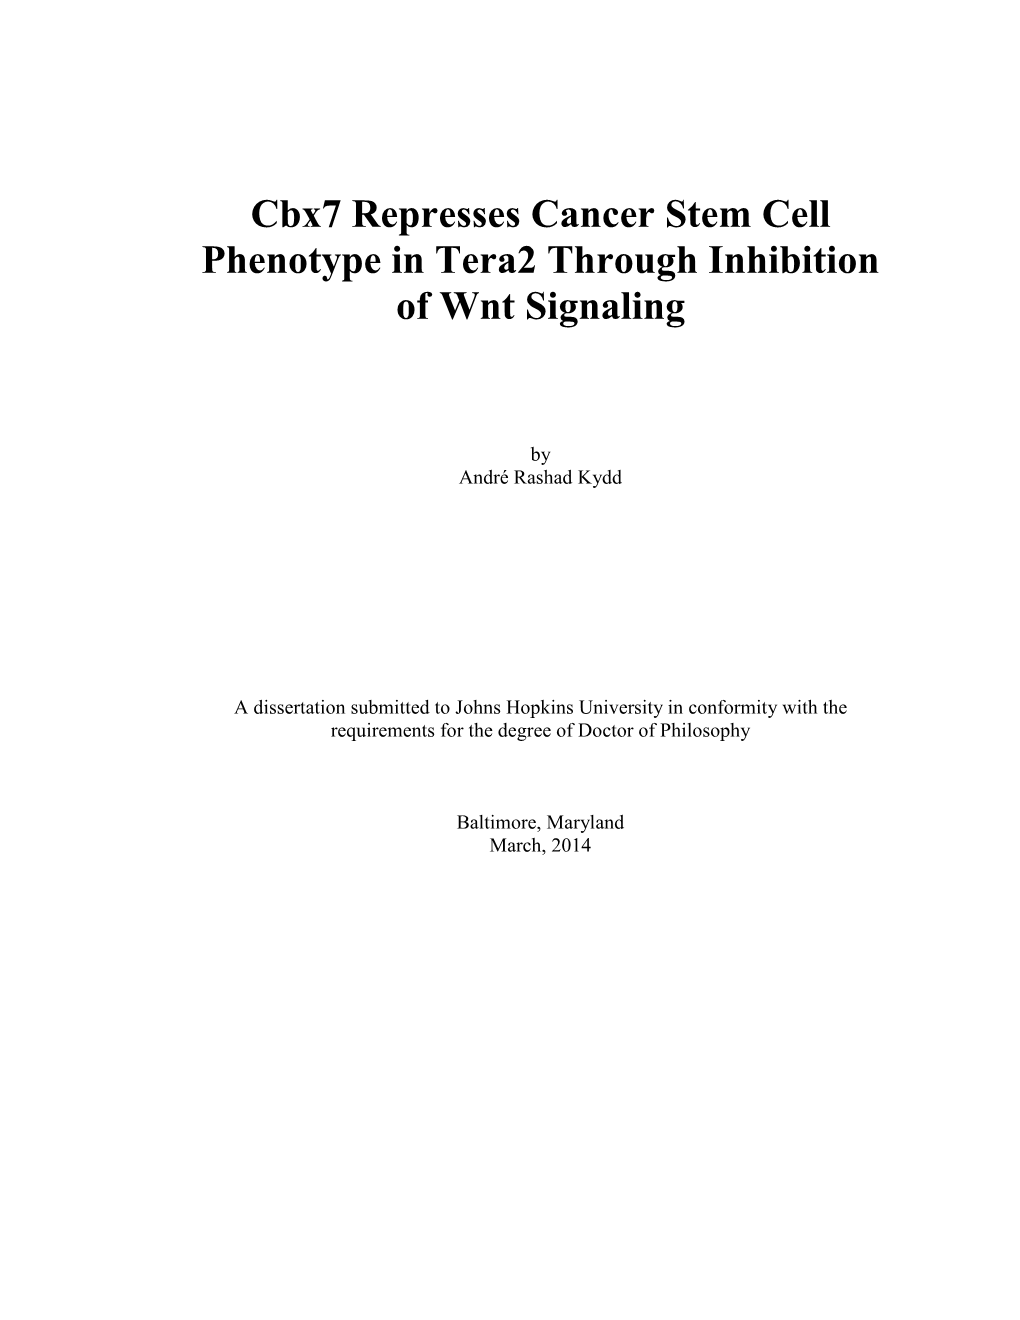 Cbx7 Represses Cancer Stem Cell Phenotype in Tera2 Through Inhibition of Wnt Signaling